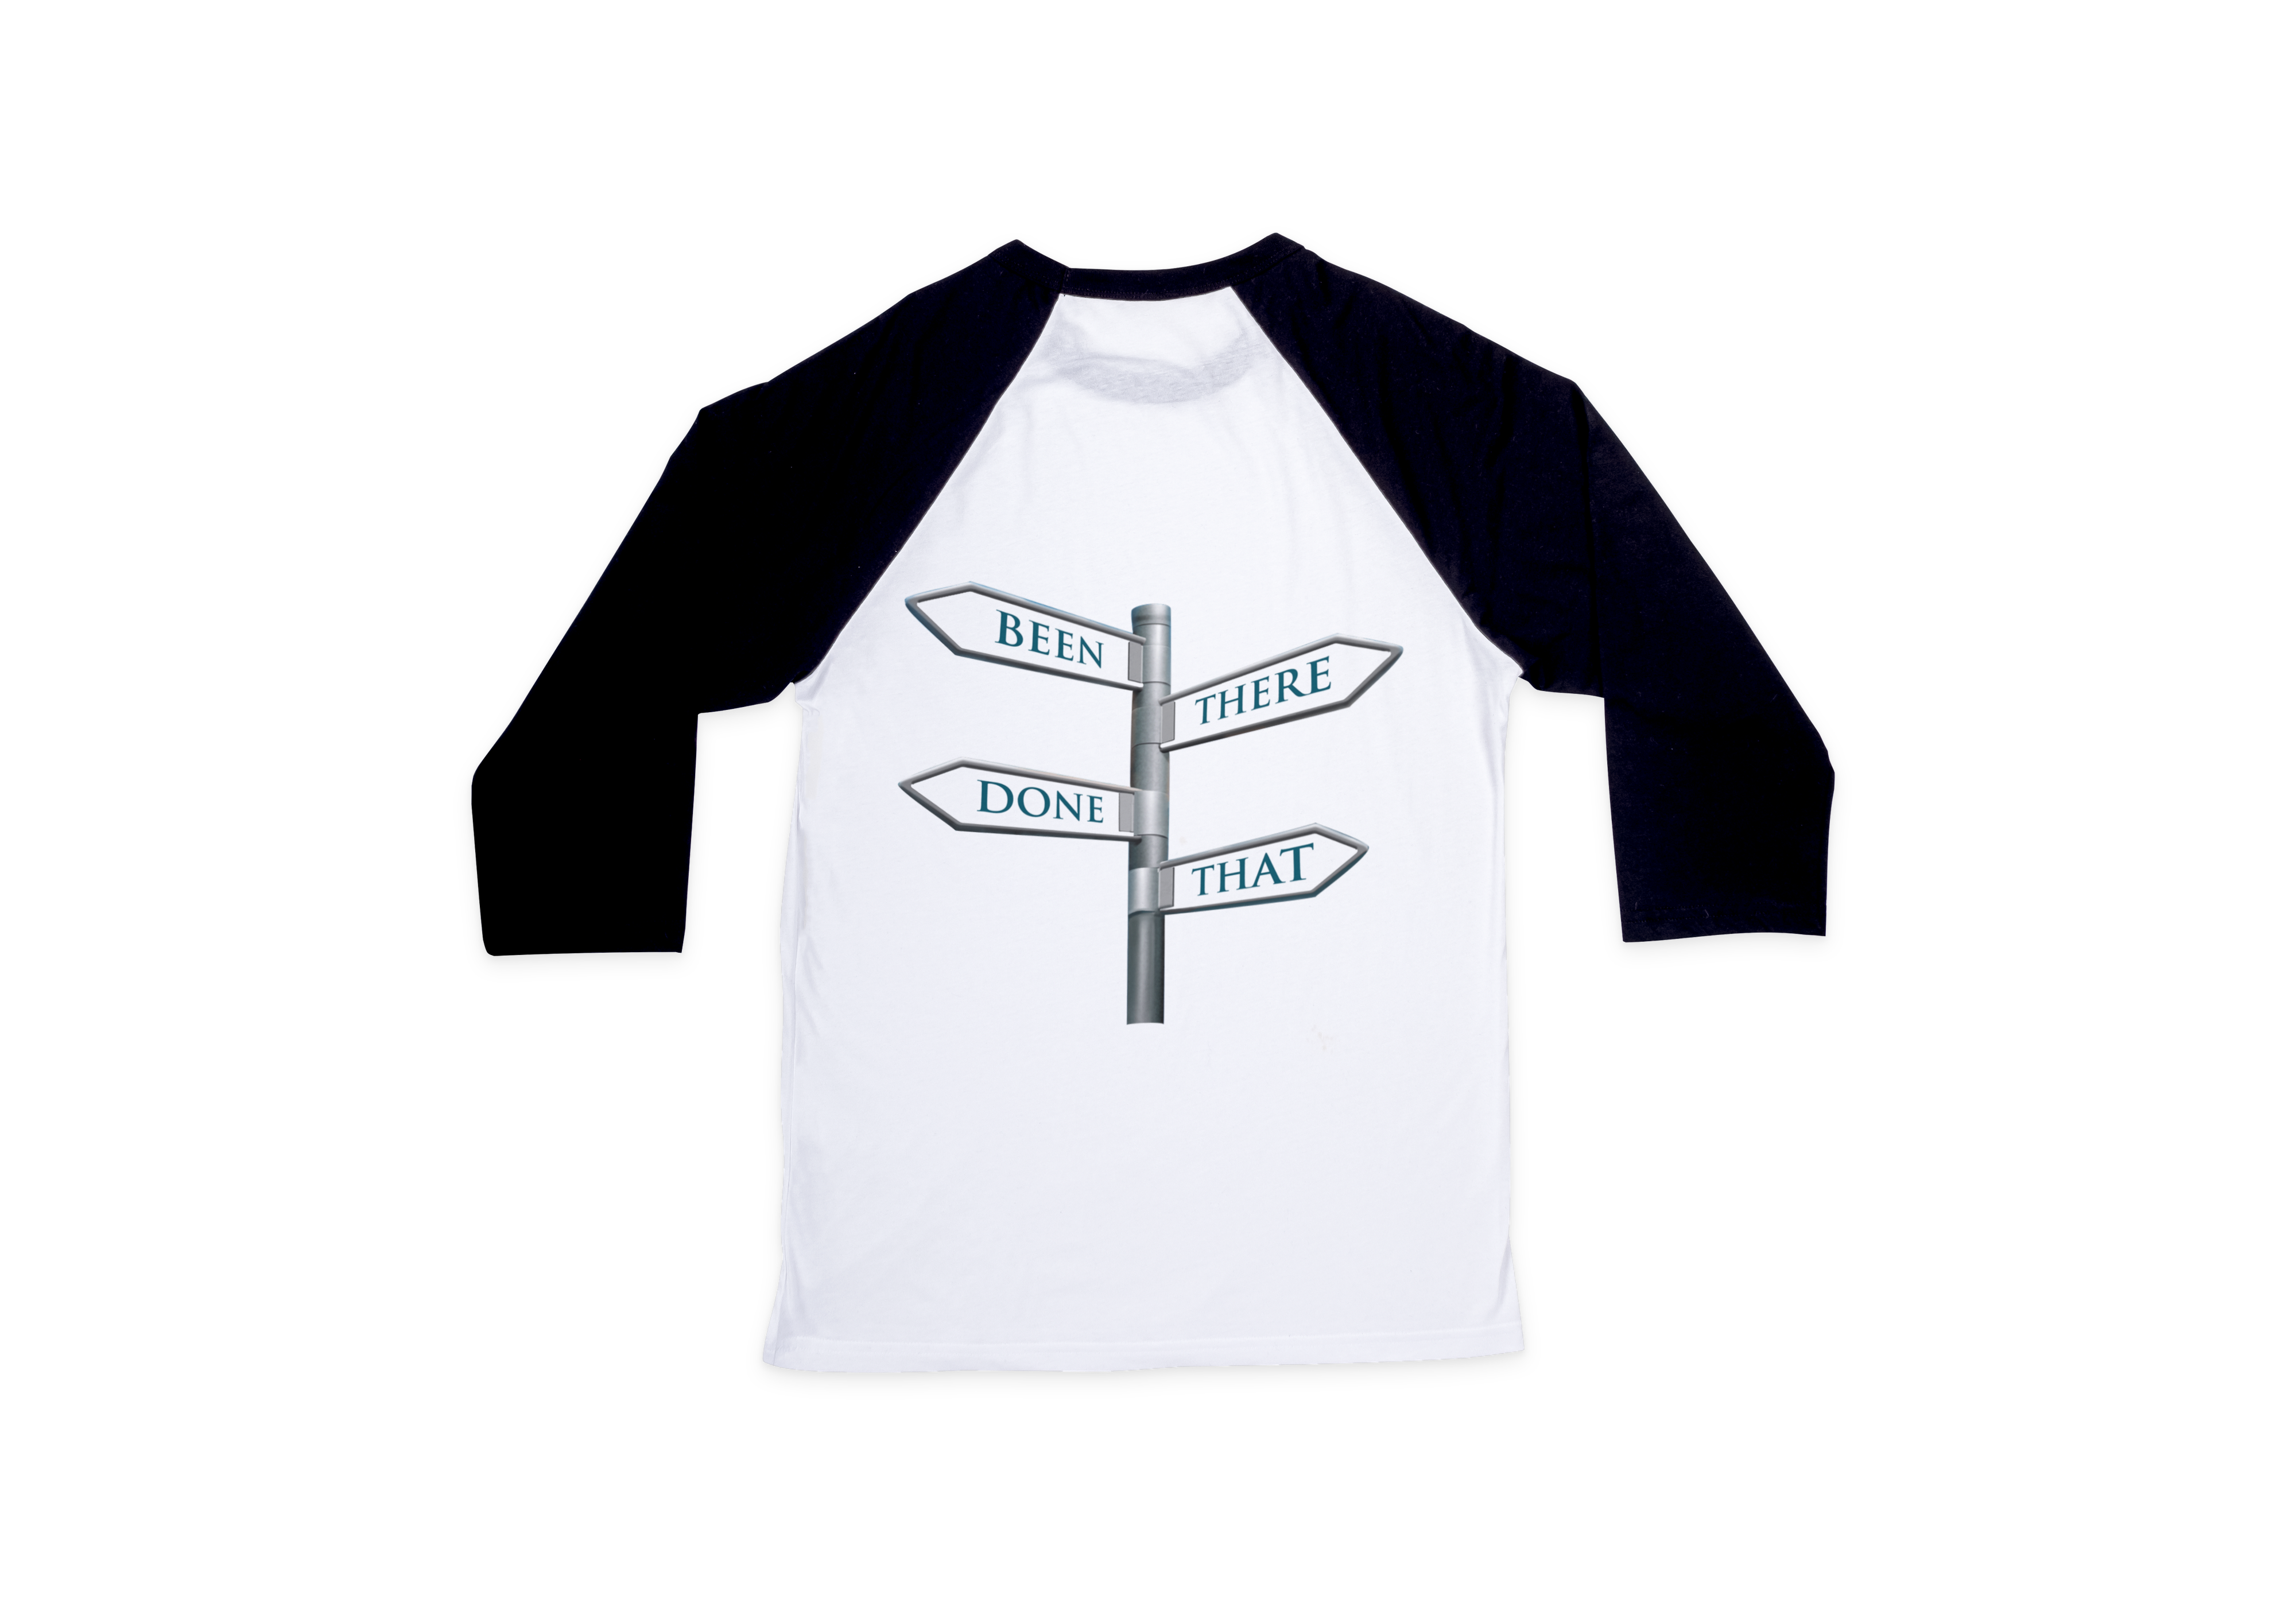 White t-shirt with black long sleeves. Design has a signpost with arrows pointing in 4 directions: Been, there, done, that.